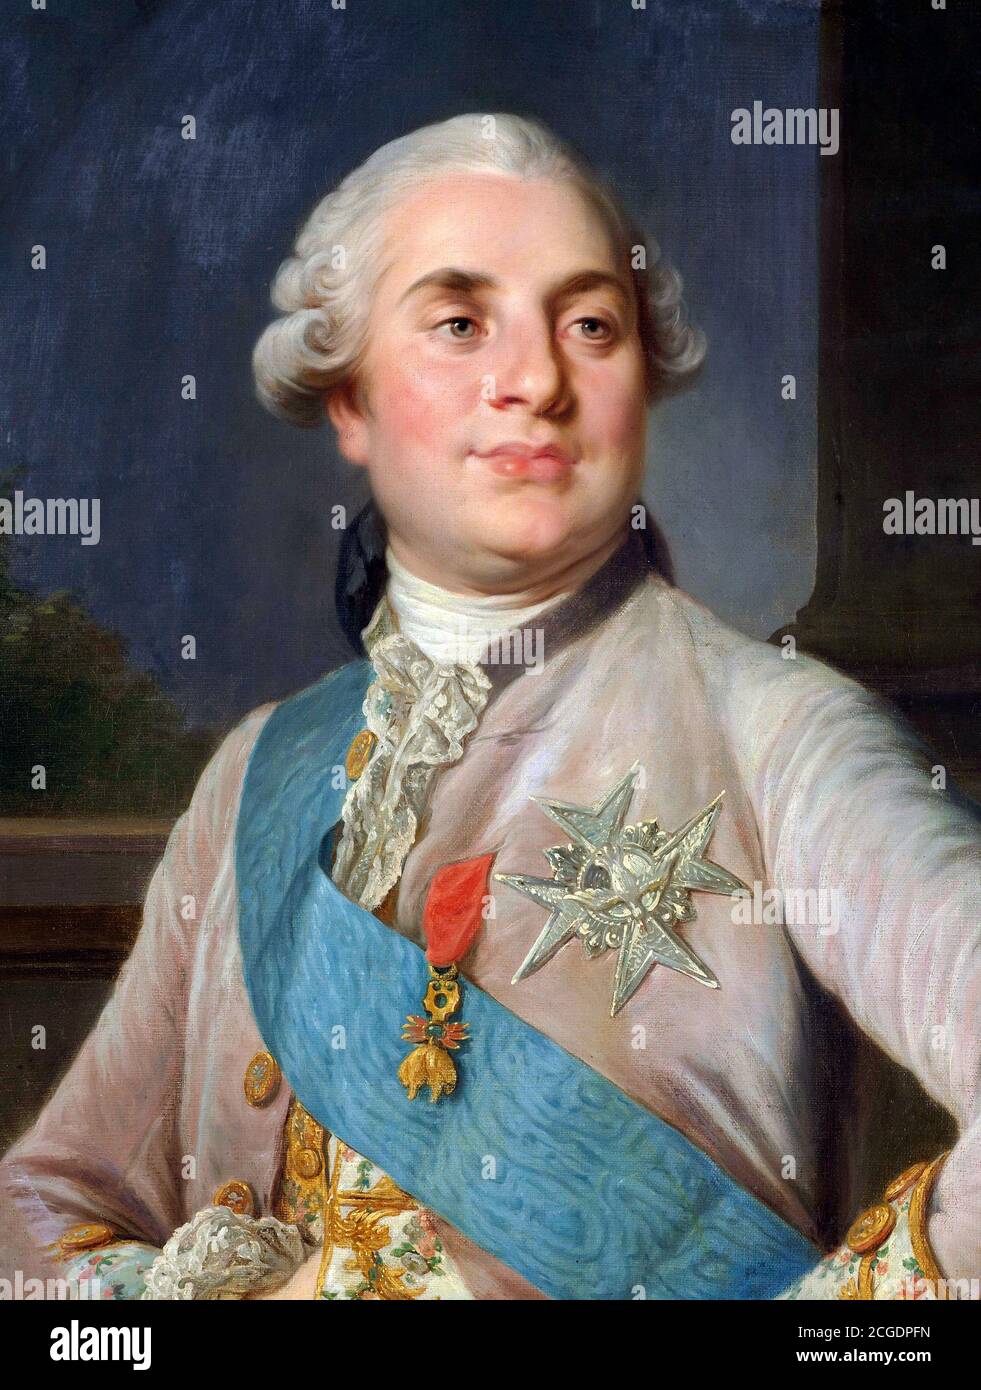 Louis XVI. Portrait of King Louis XVI of France by workshop of Joseph Duplessis, oil on canvas, 1774-75 Stock Photo